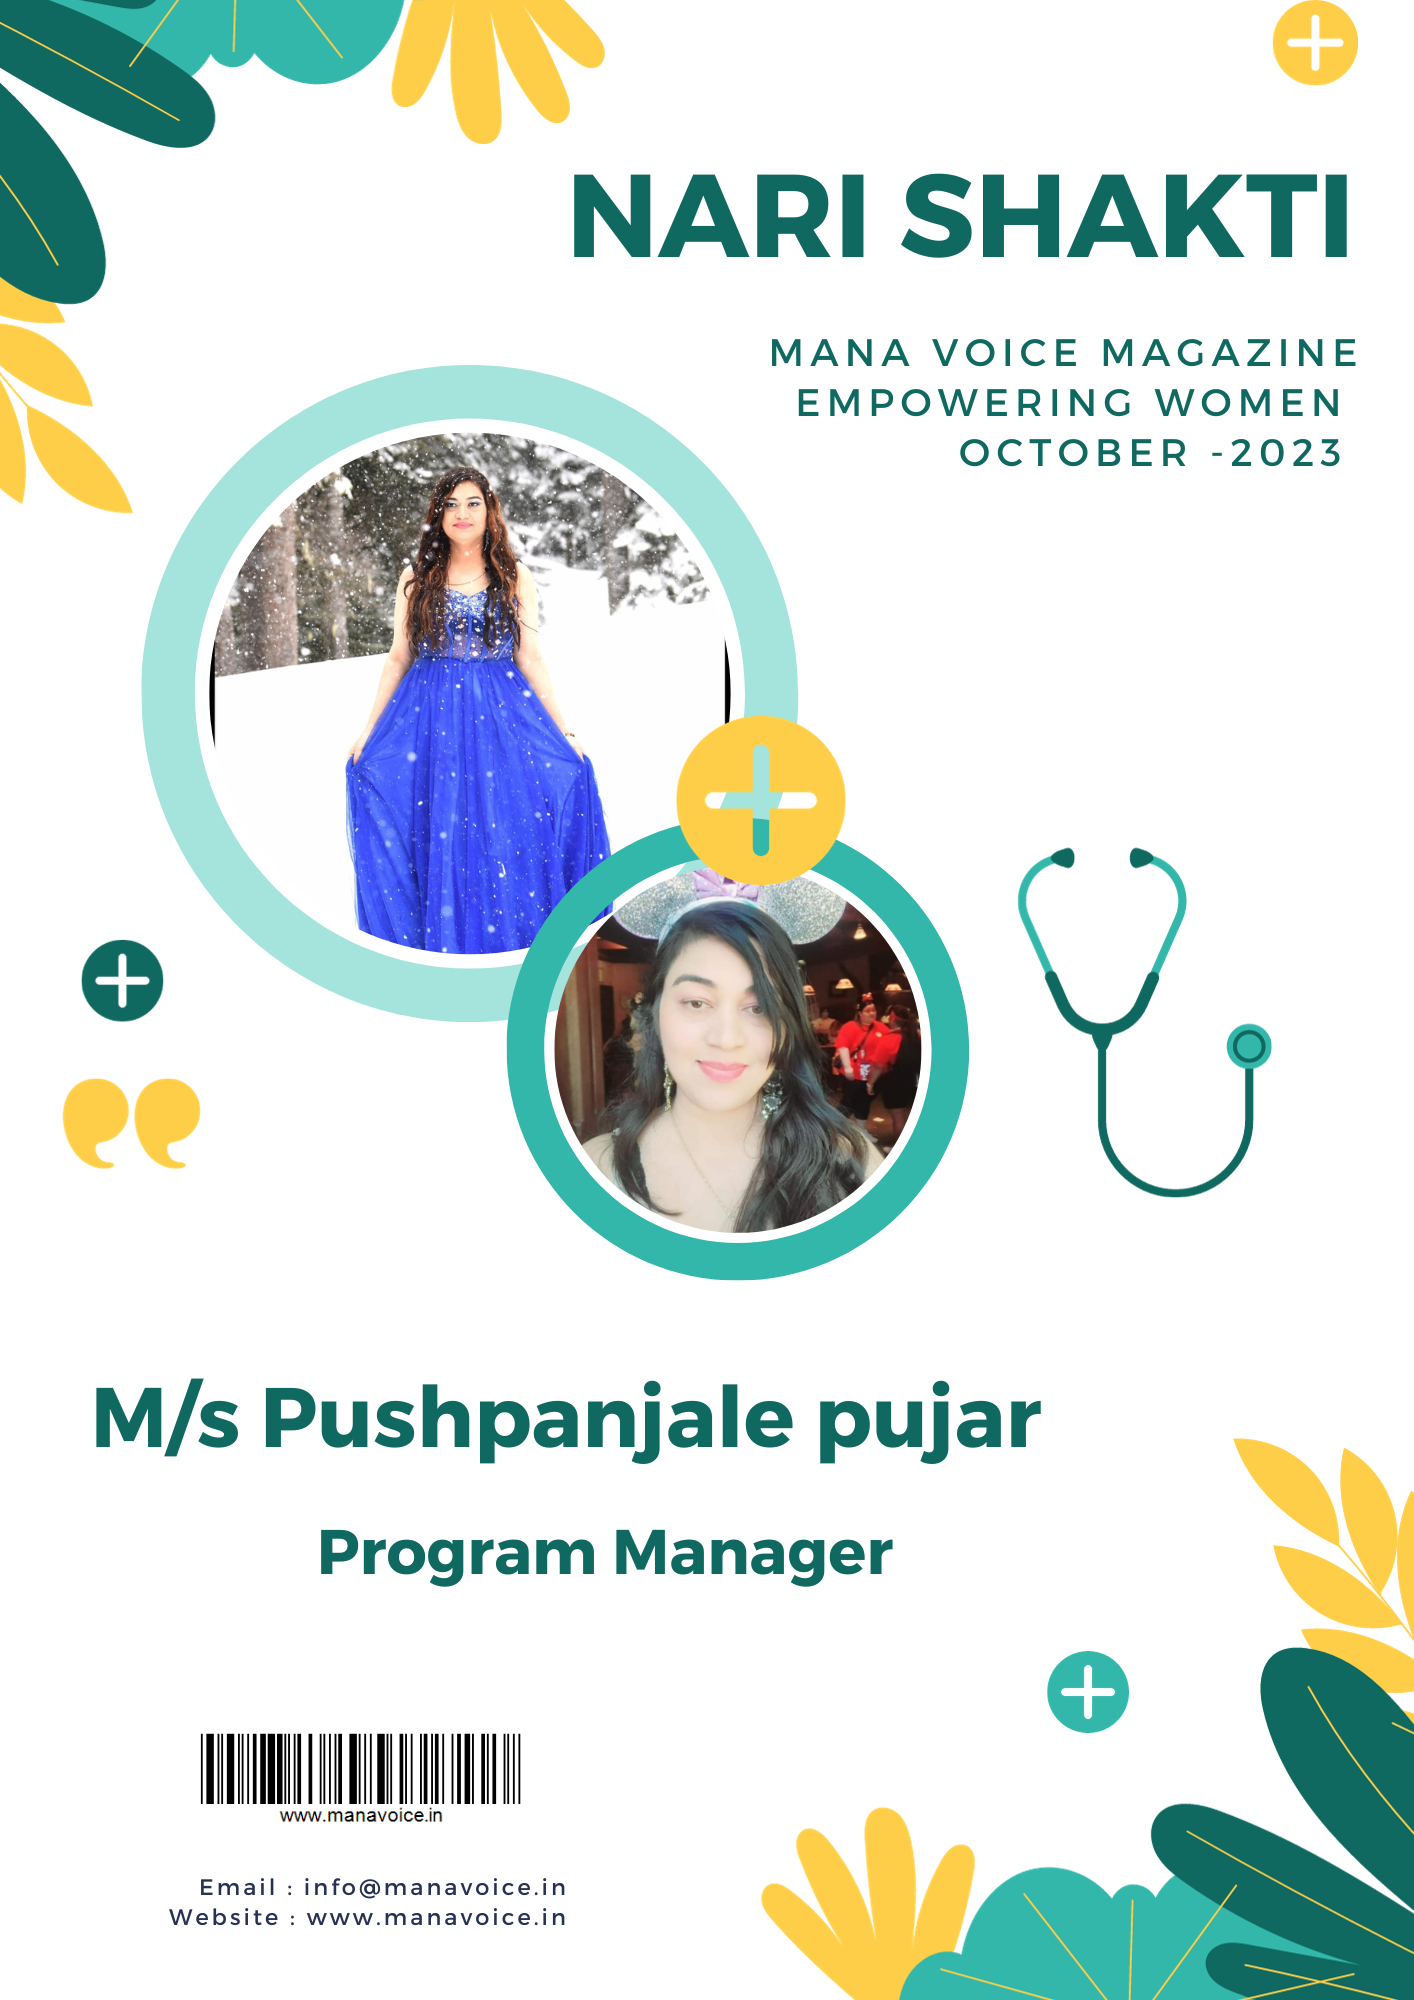 Pushpanjale Pujar: A Real-Life Story of Dreams and Determination |  Nari Shakti - Empowering Women | Mana Voice